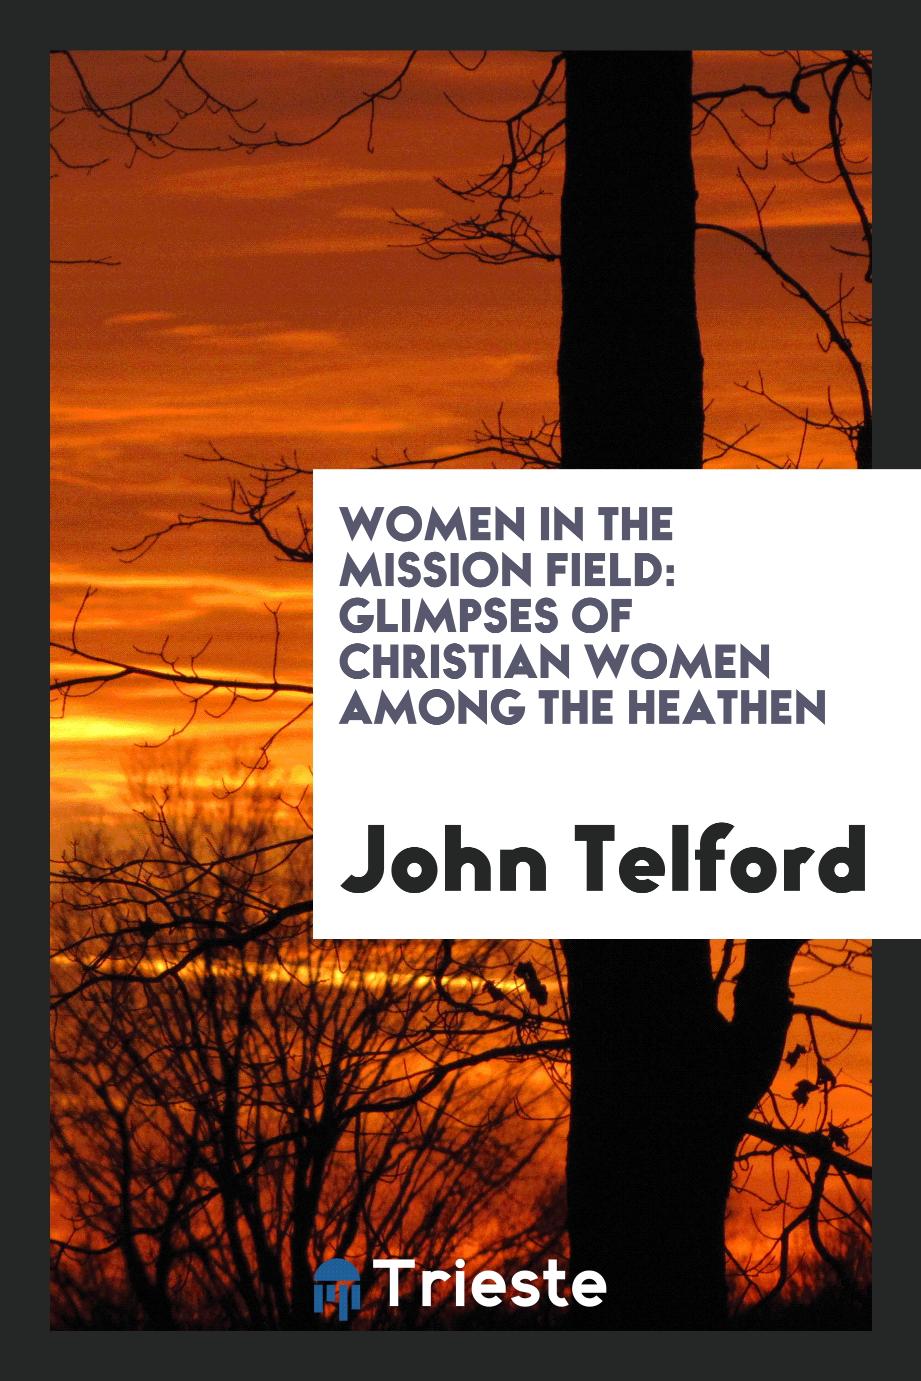 Women in the mission field: glimpses of Christian women among the heathen